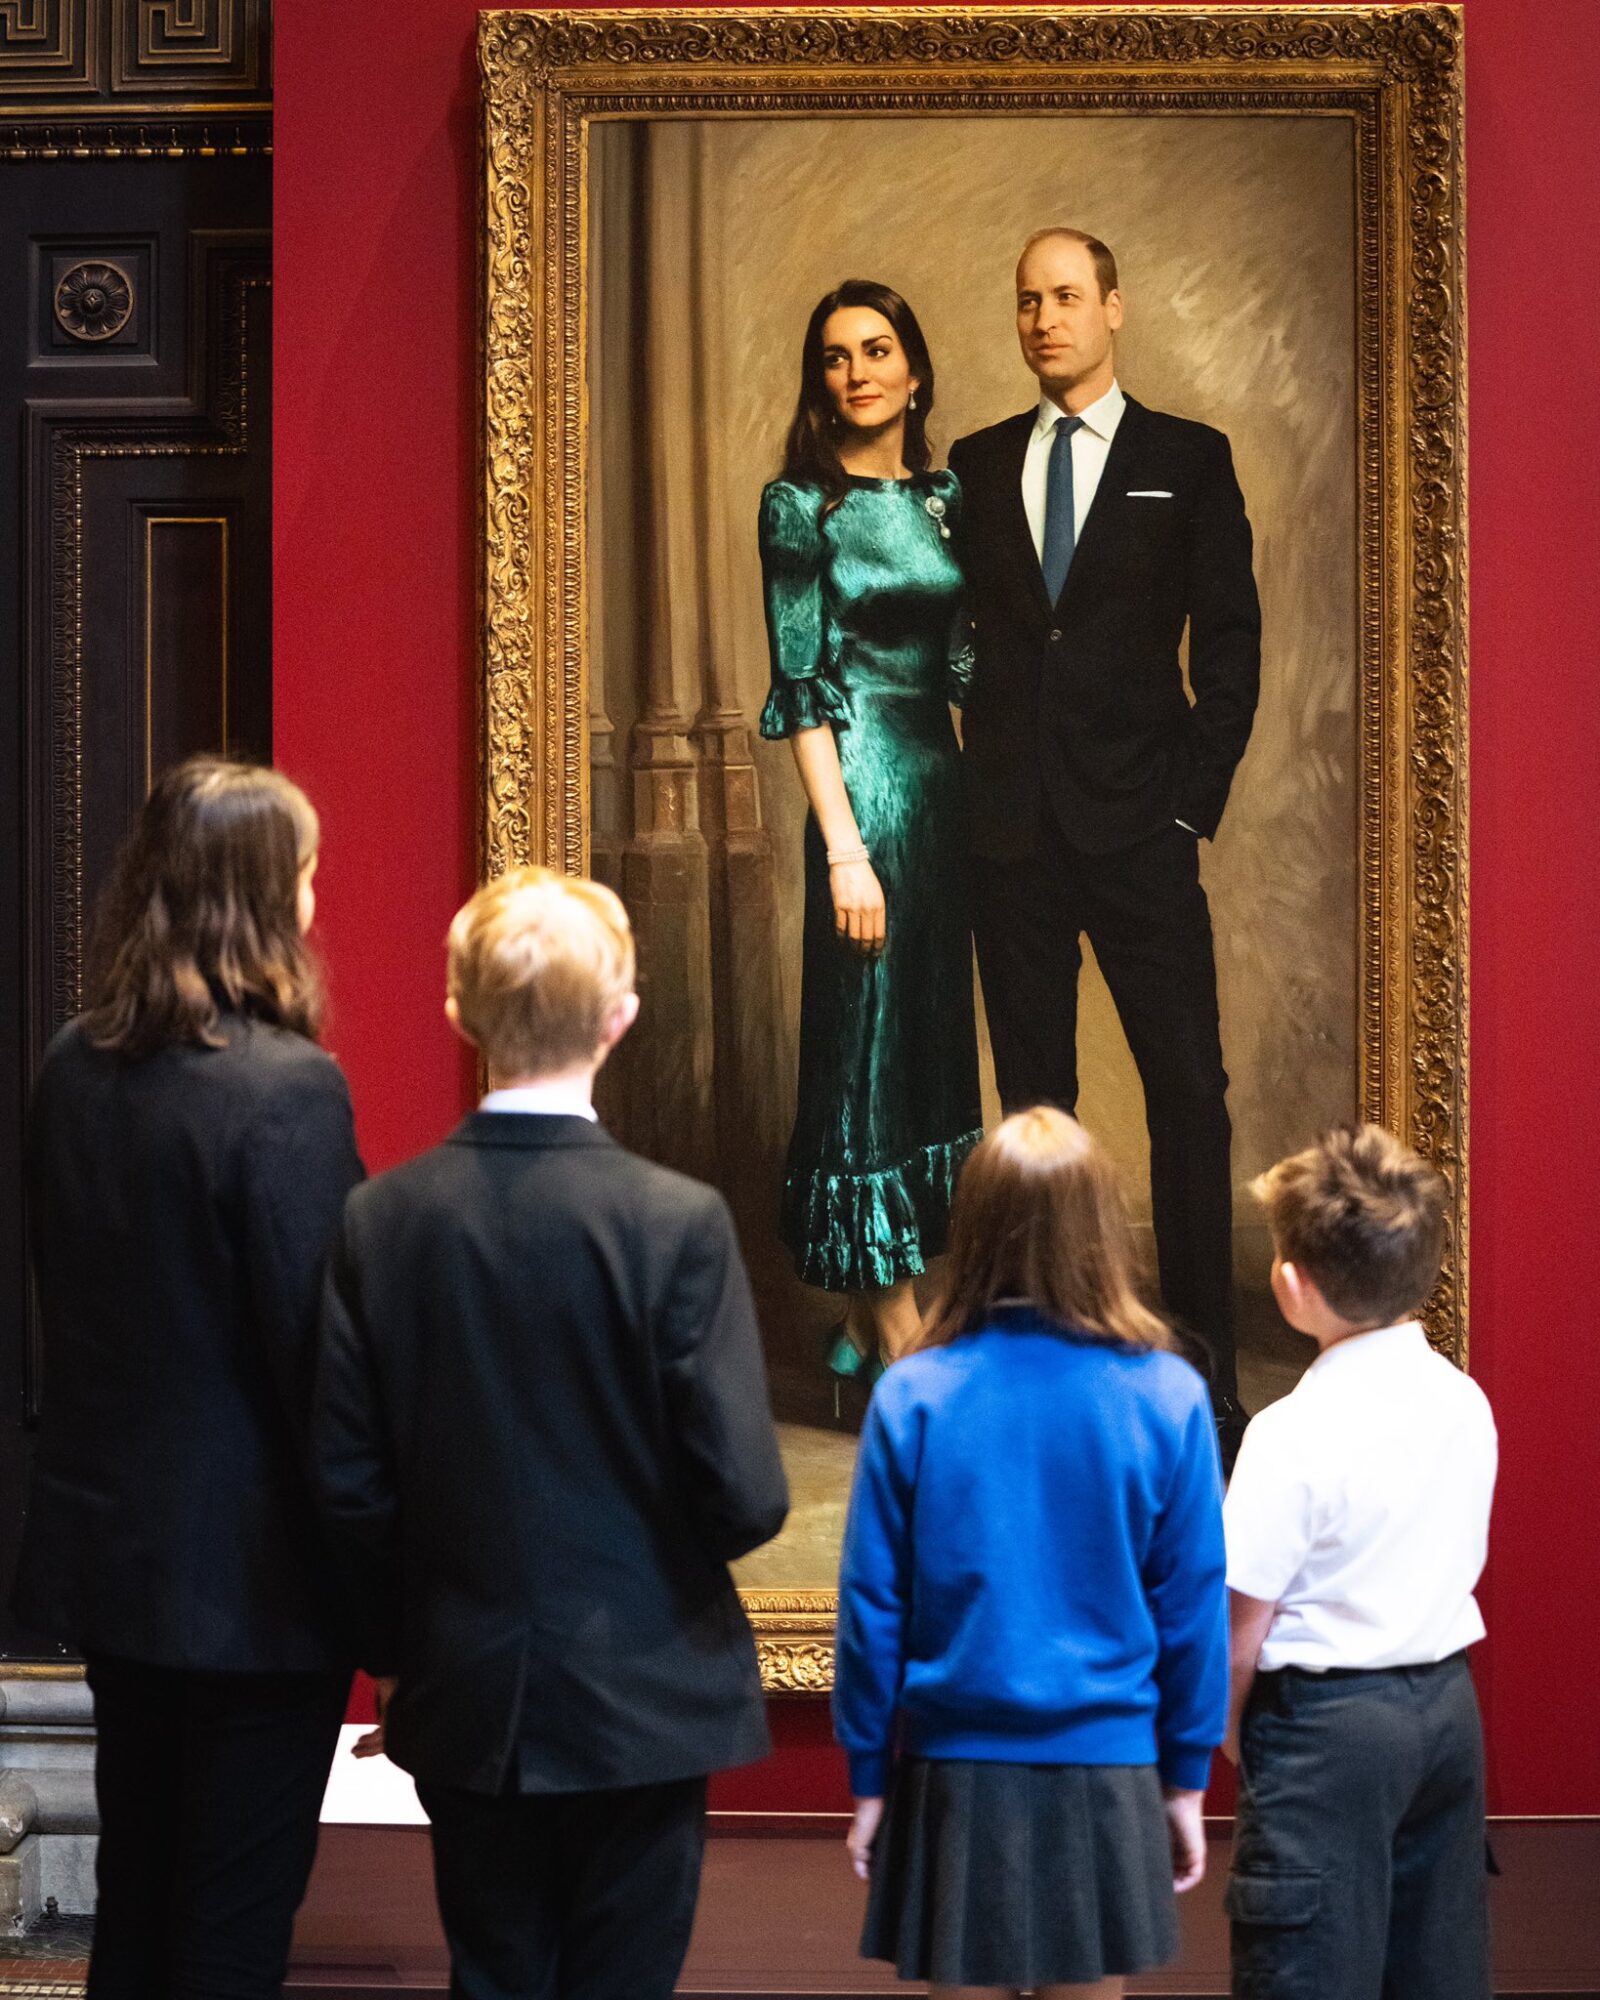 Duke and Duchess of Cambridge official portrait 2022 painted by artist Jamie Coreth